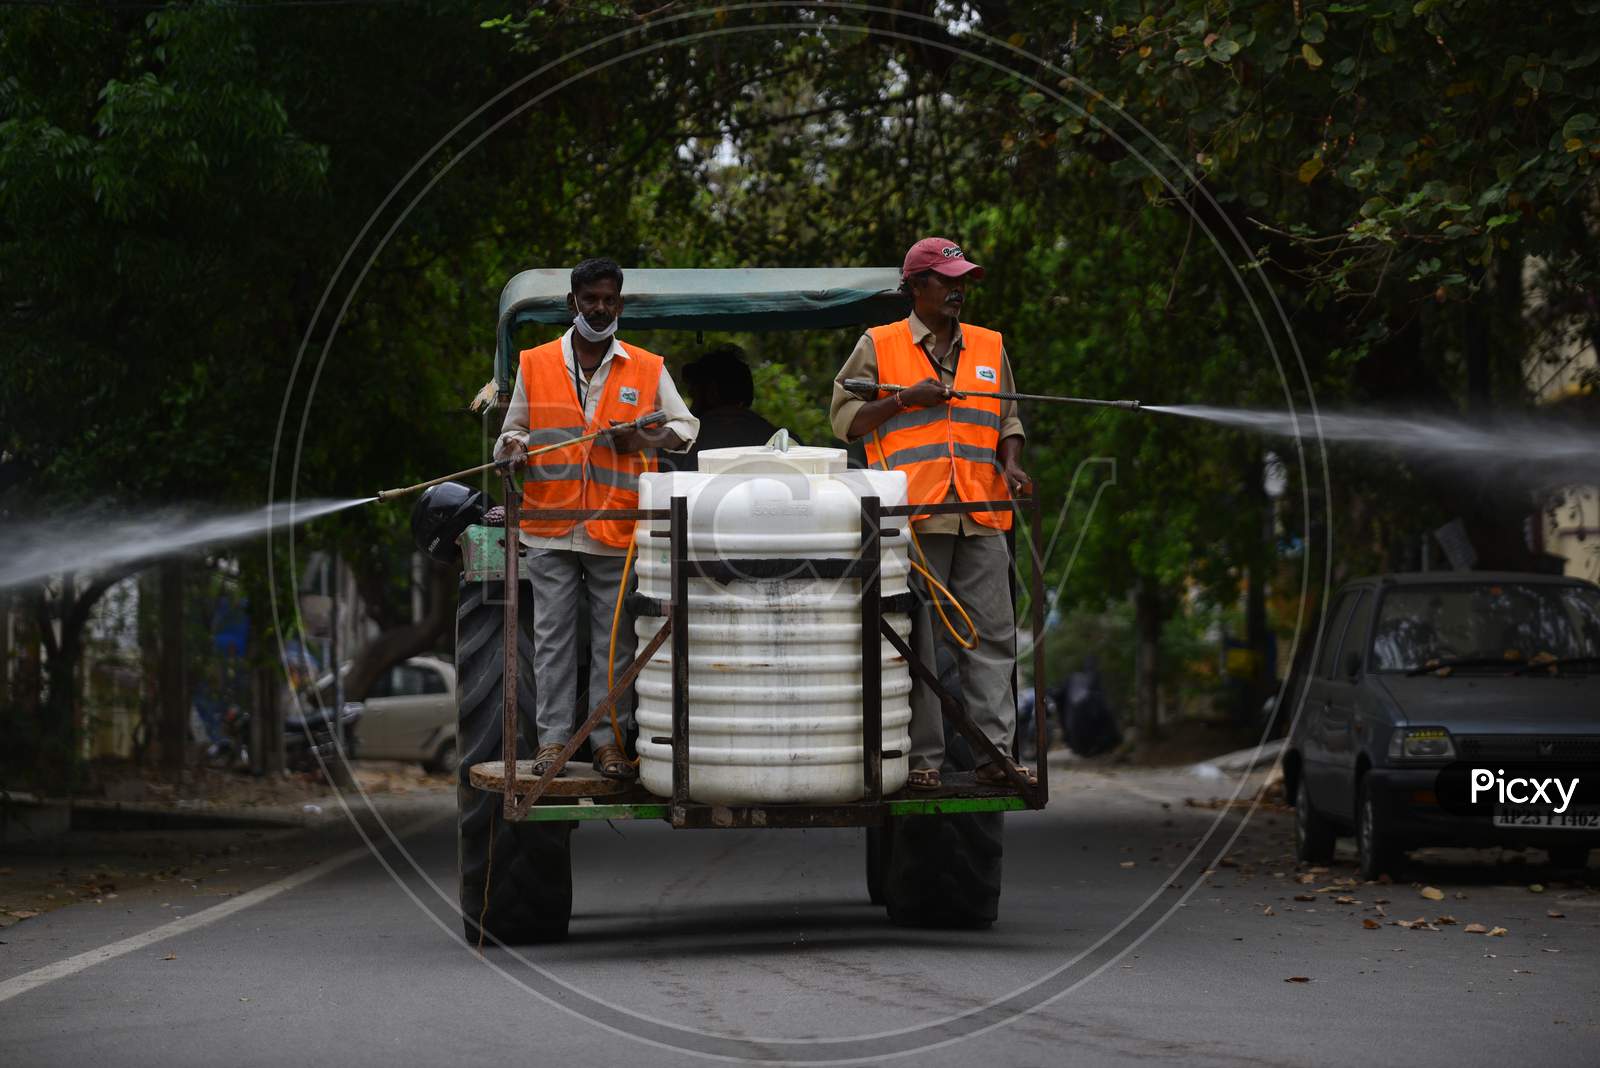 Disinfectant (Sodium Hypochlorite) being sprayed in streets by GHMC Sanitation workers using motors fixed to tractors to prevent the spread of coronavirus, covid19 during the nationwide lockdown